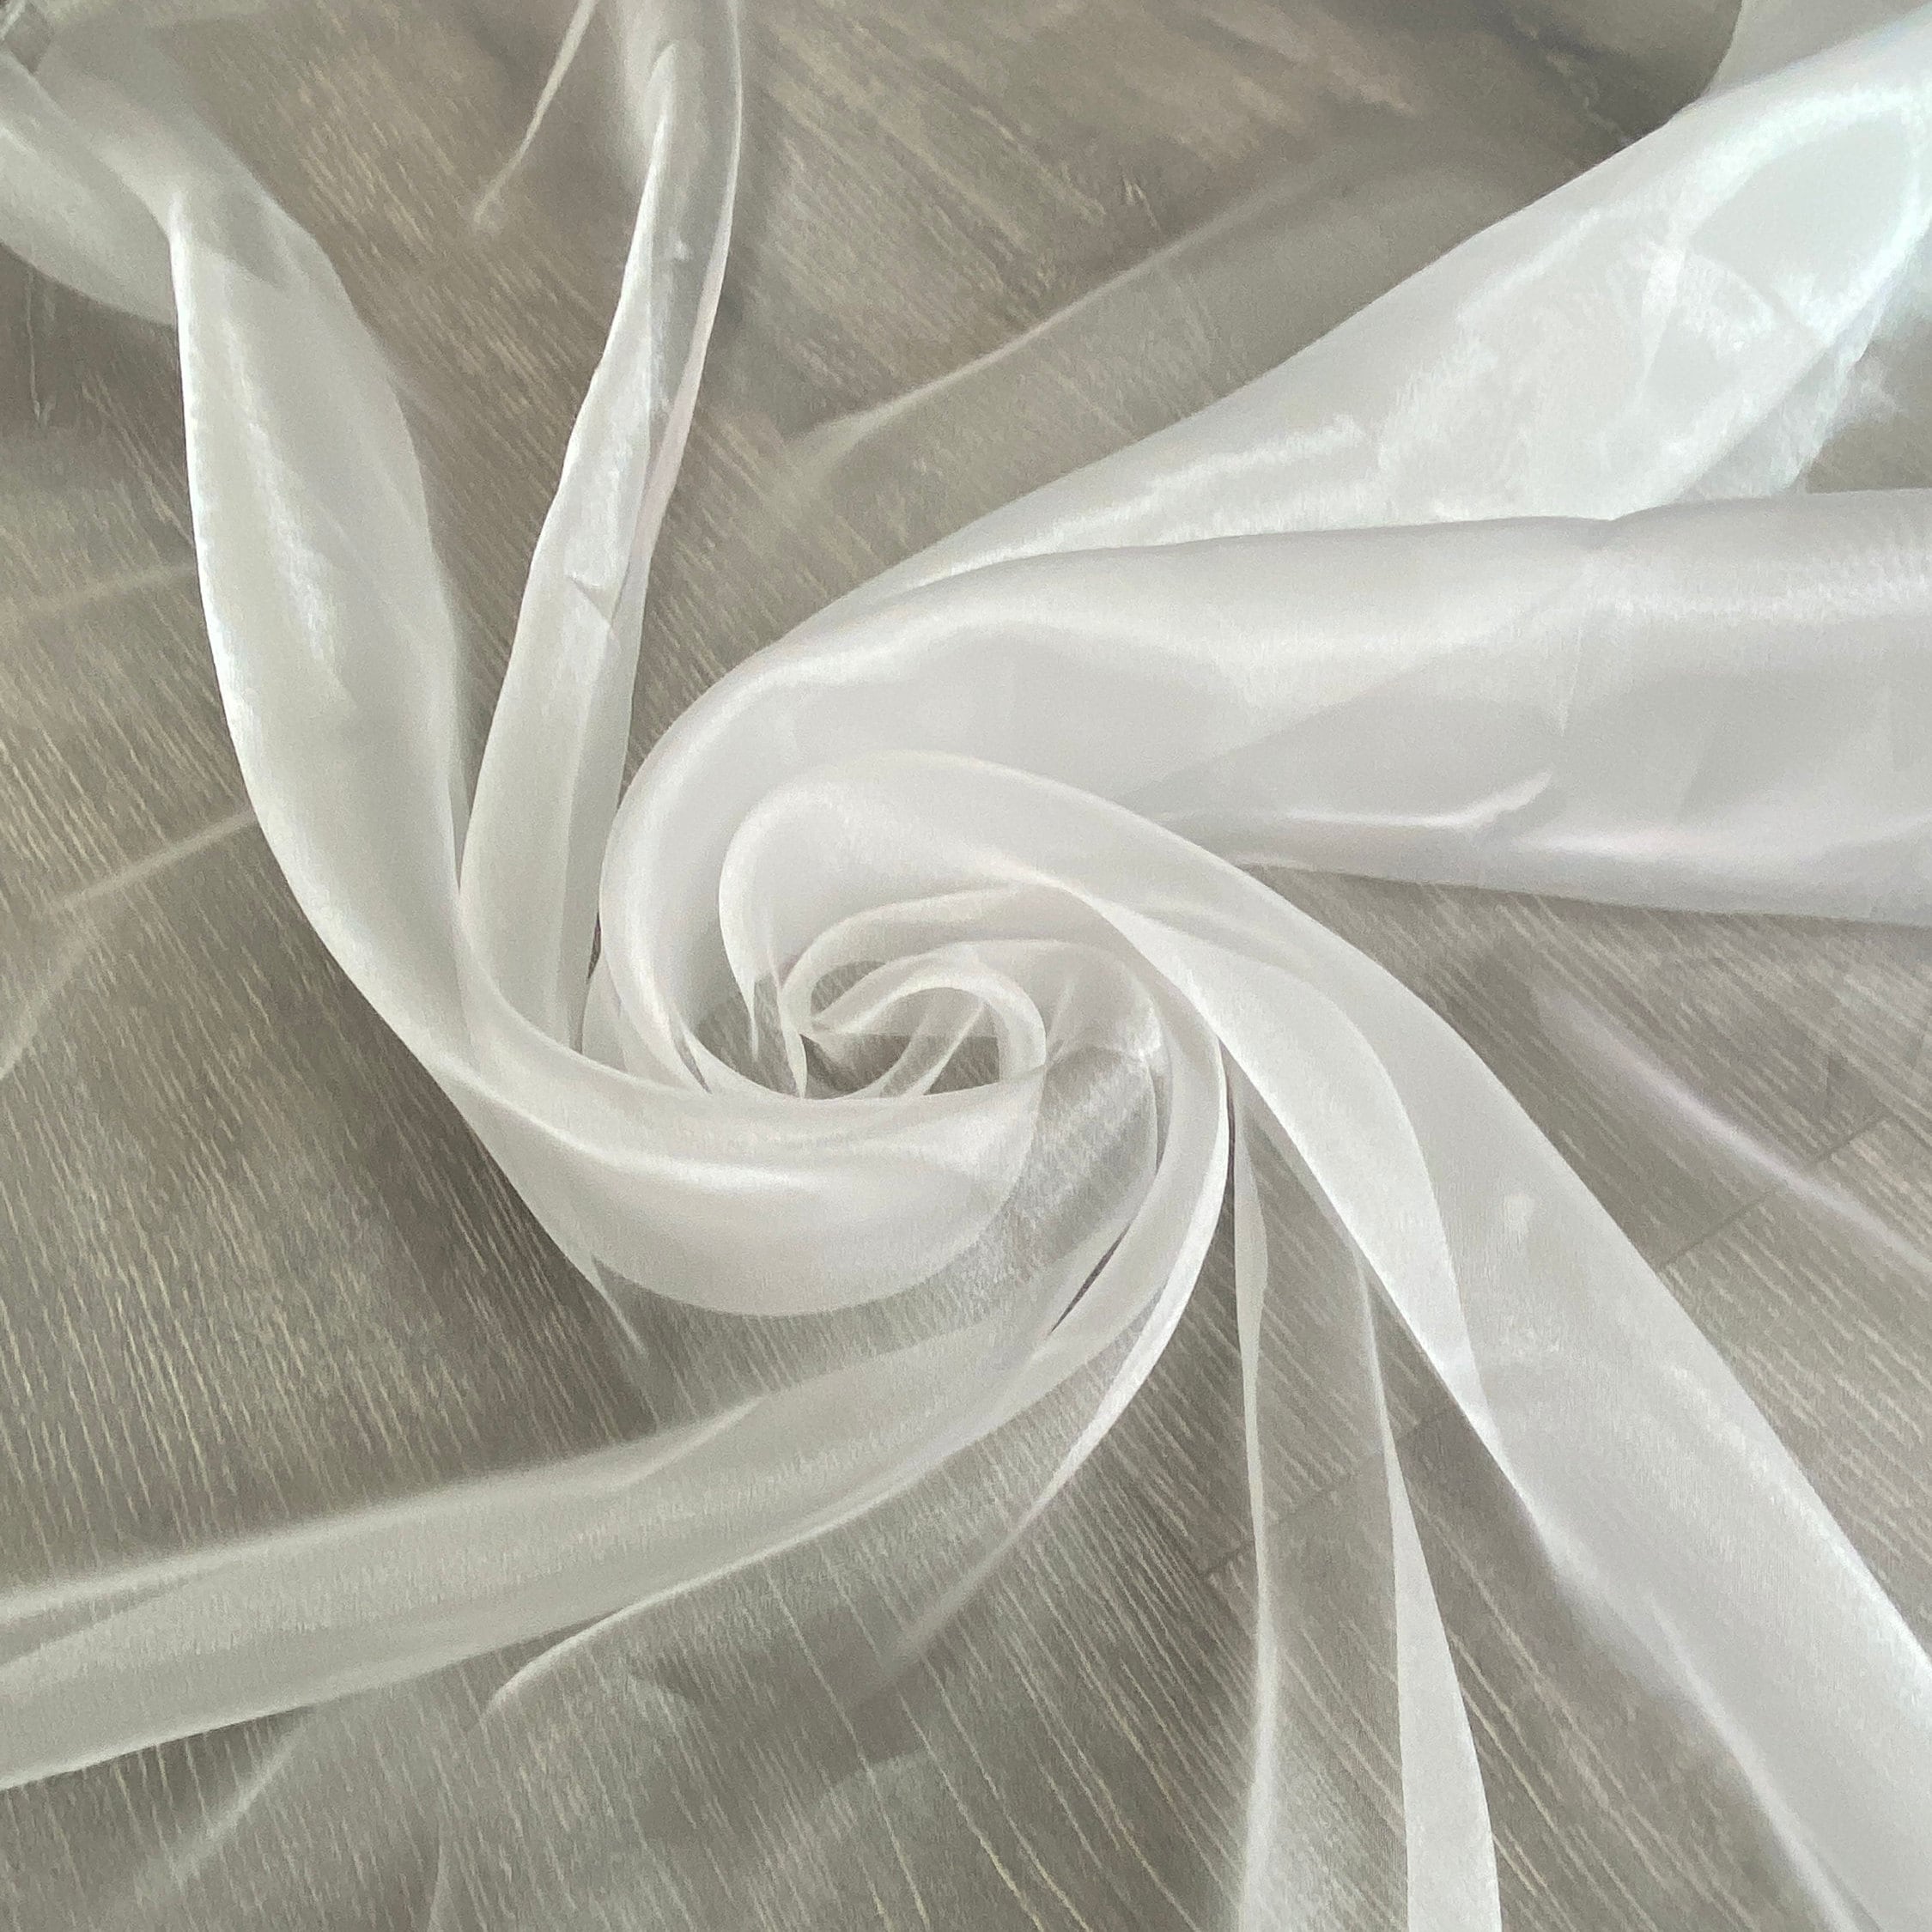 Shatex Tulle Fabric net, 63 in. x 5 yard Tulle Organza Fabric Spool for DIY  Tutu Skirt Baby Decor Wedding Birthday Party White DIY63IN5WH - The Home  Depot